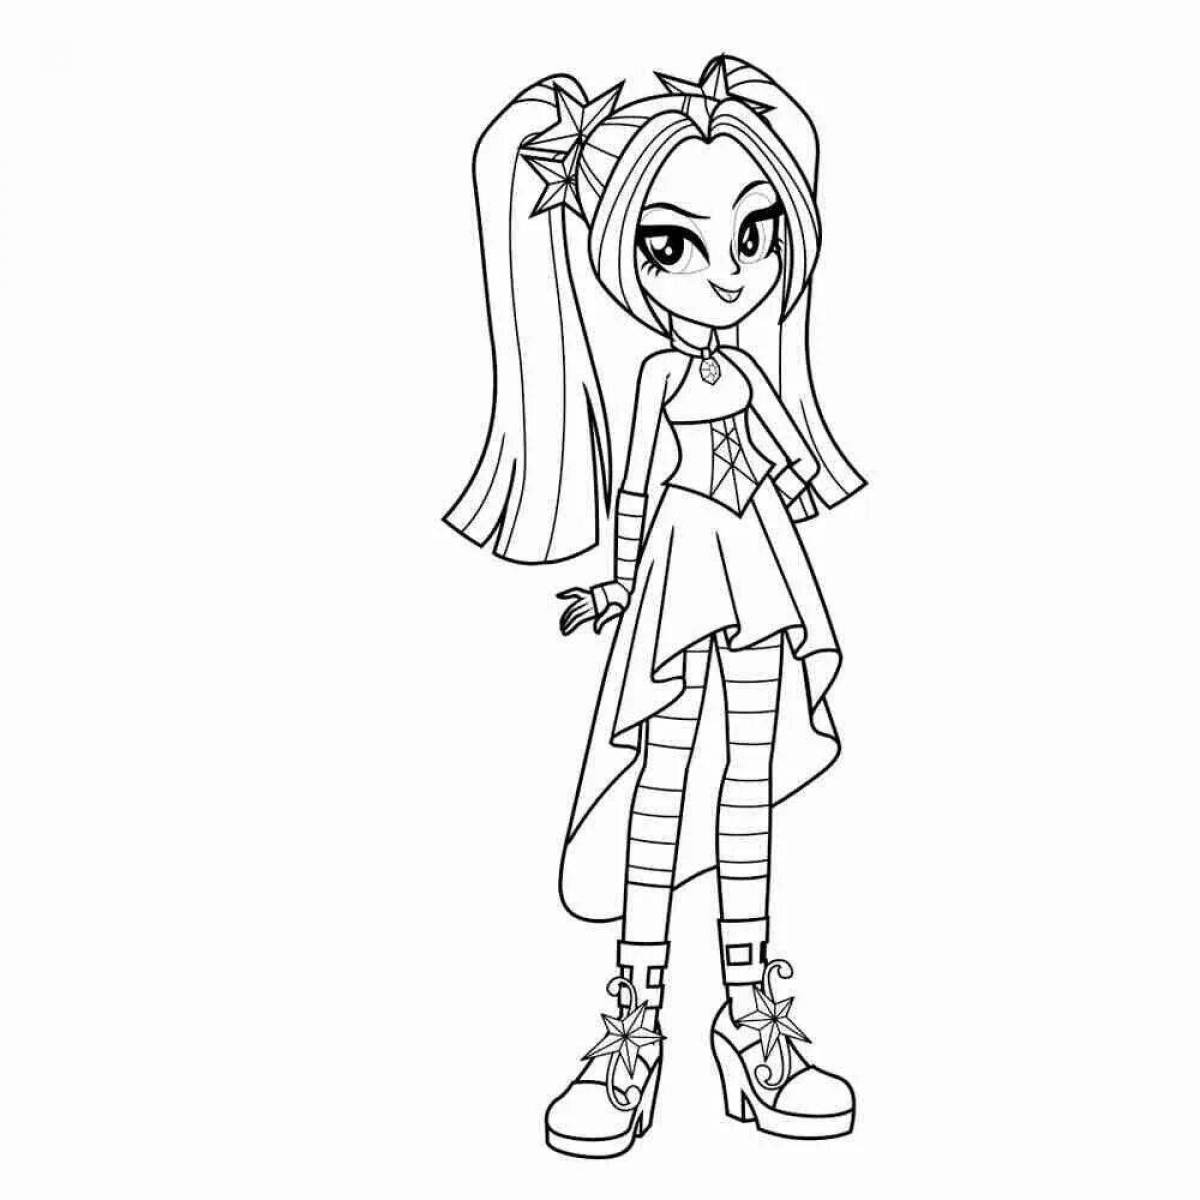 Coloring page blissful equestria girls